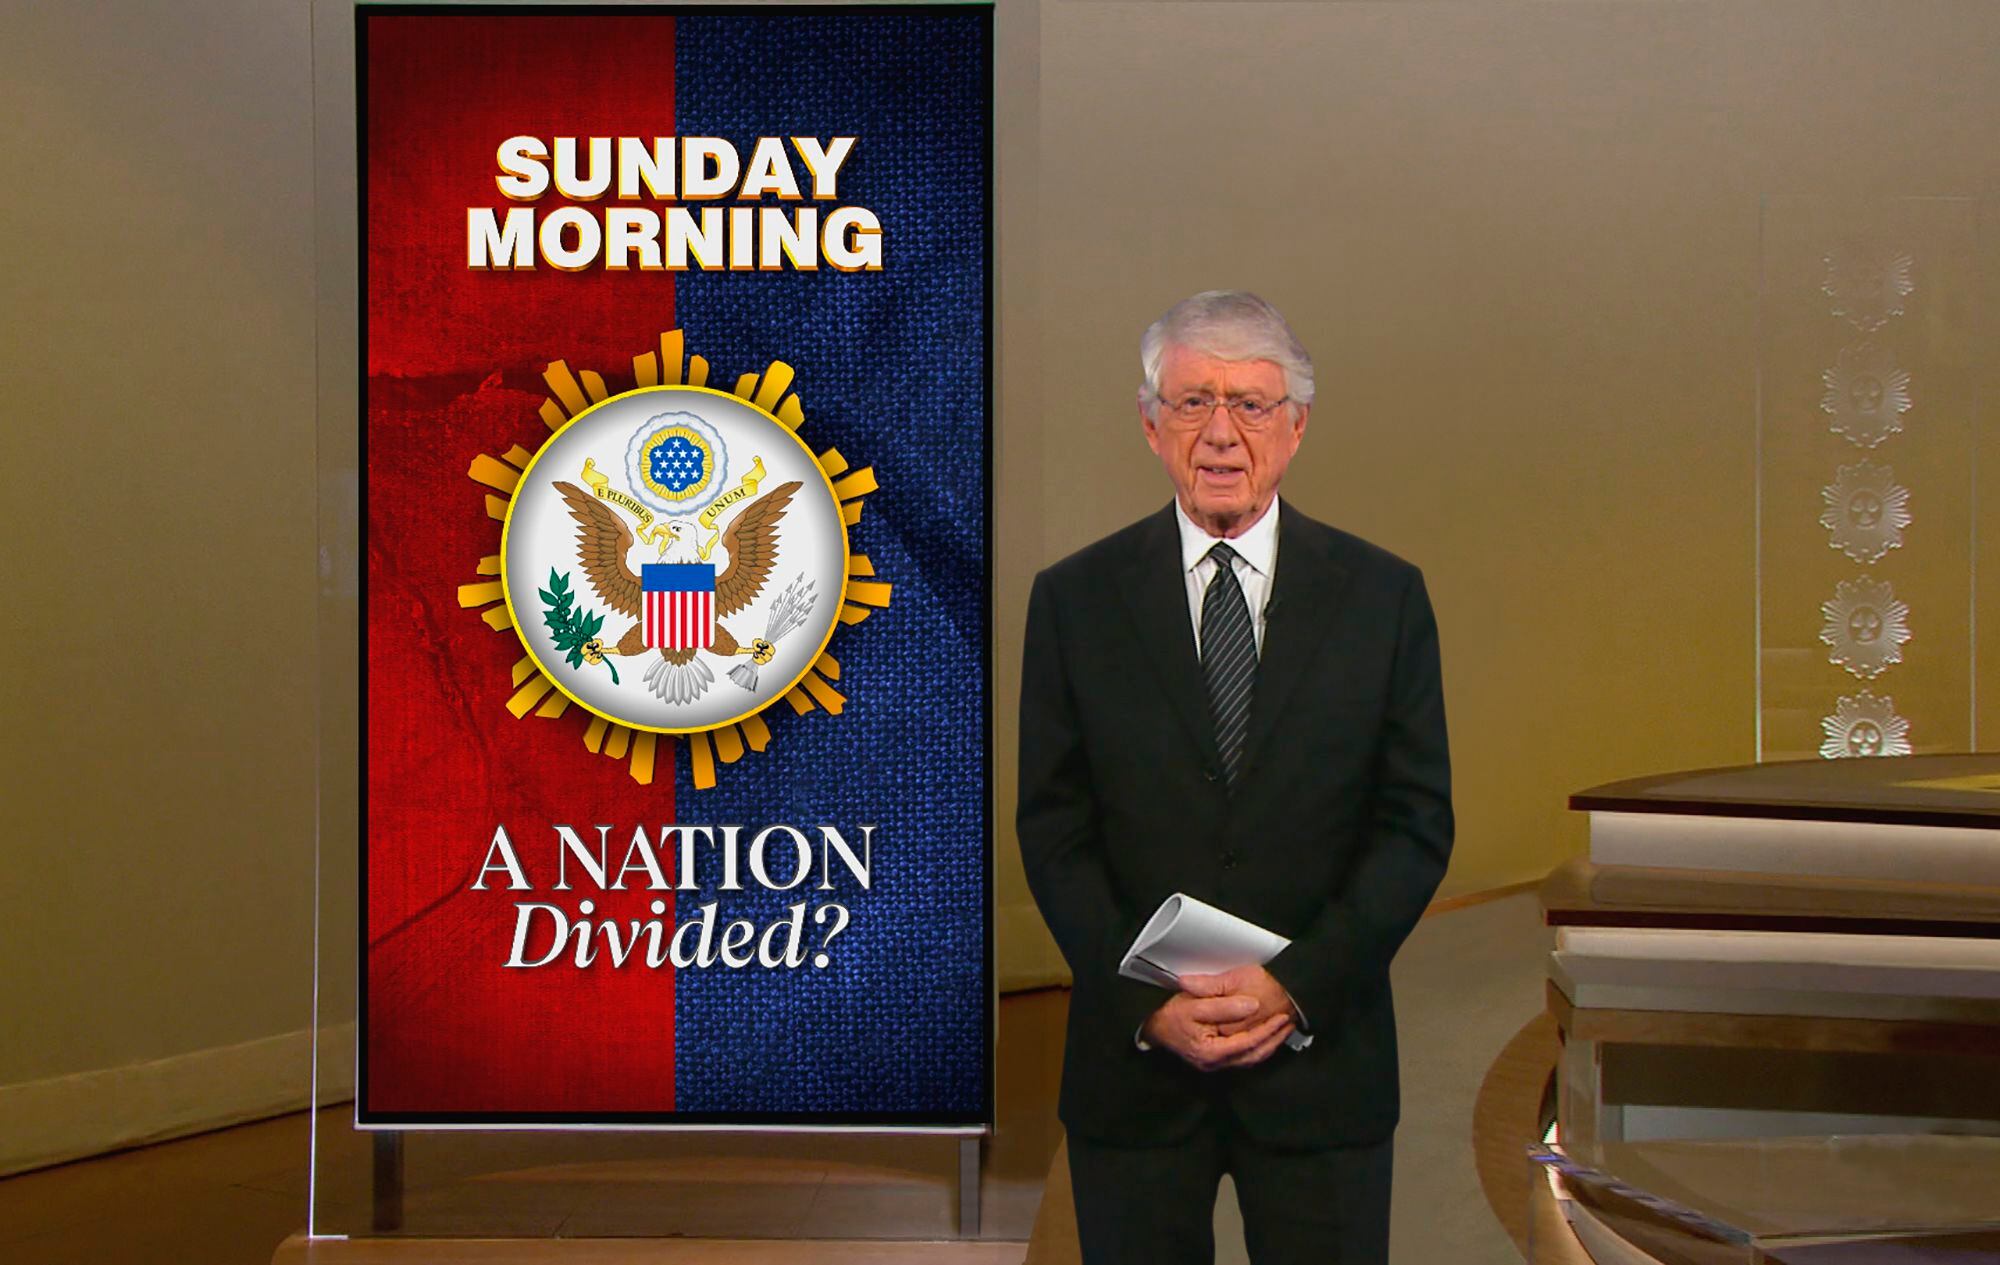 Ted Koppel hosts show on US divisions